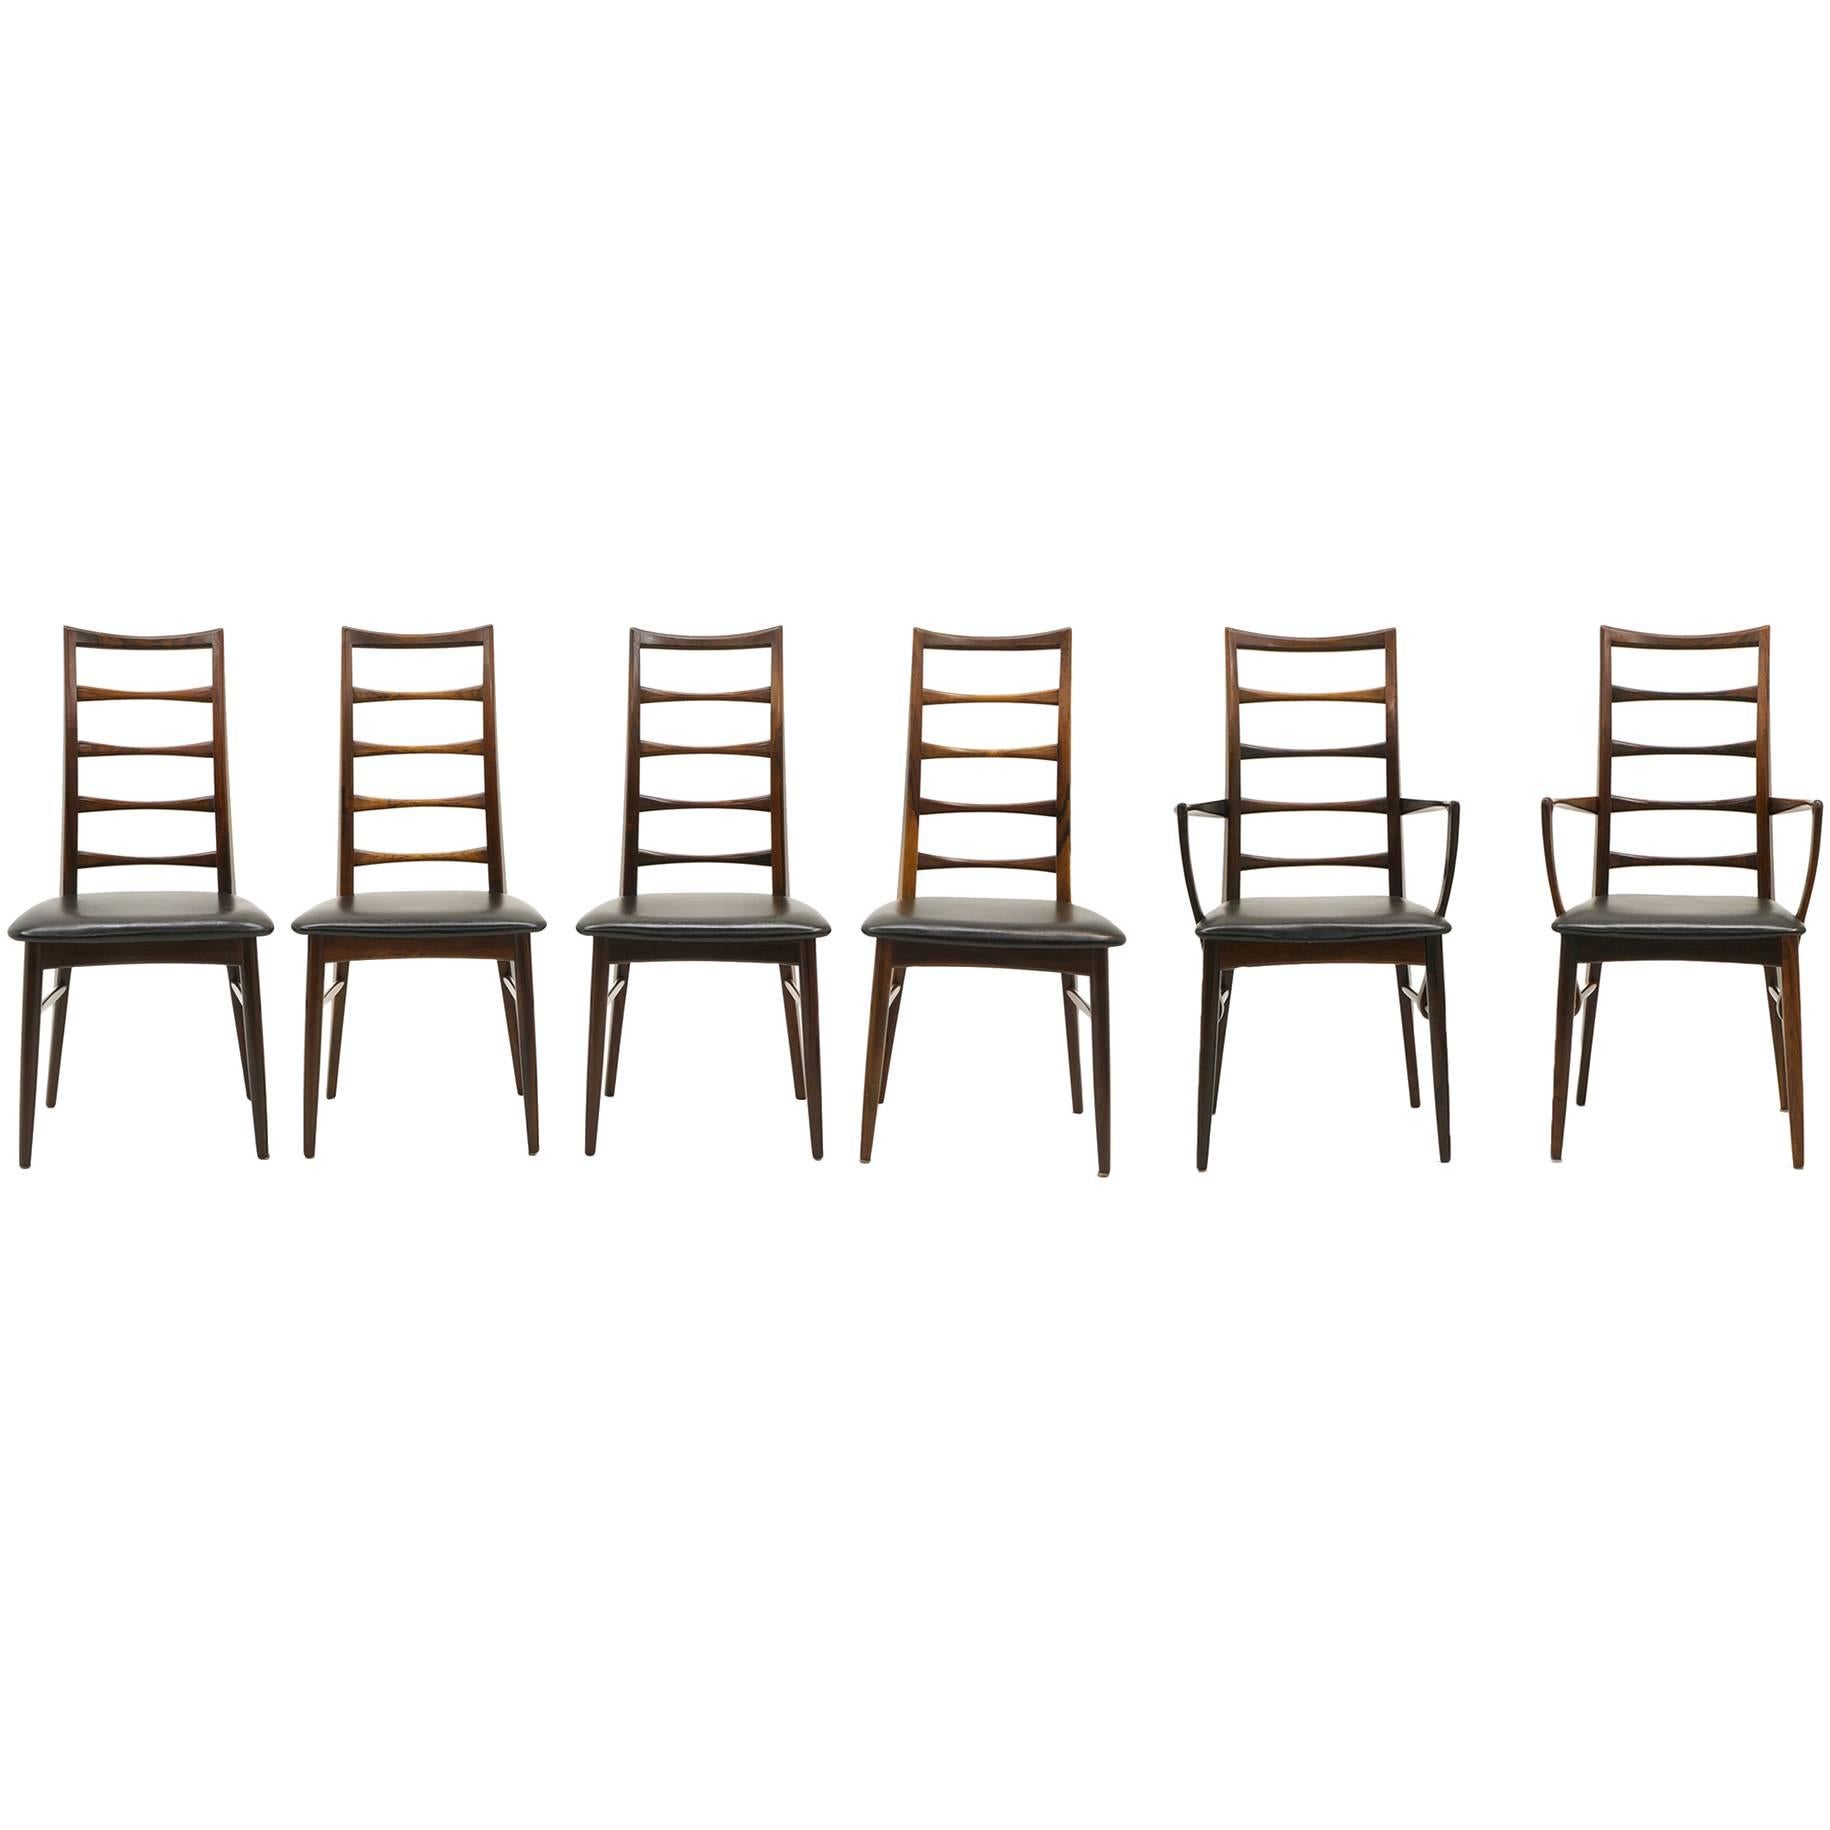 6 Rosewood Lis Dining Chairs by Niels Kofoed, Two with arms, Four armless